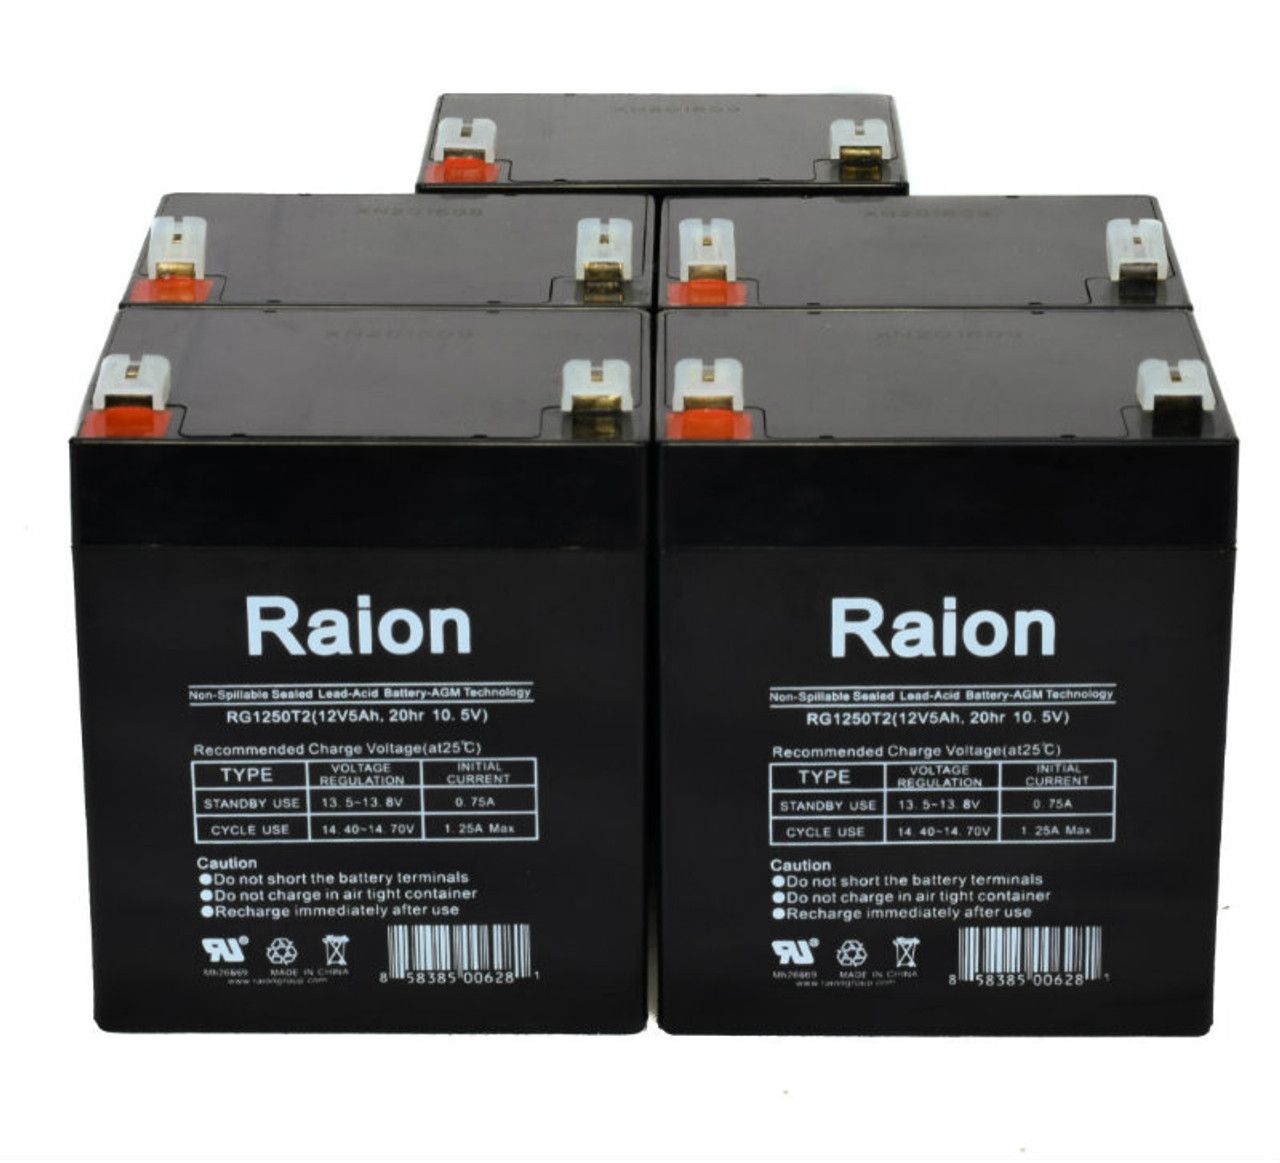 Raion Power 12V 5Ah RG1250T2 Replacement Lead Acid Battery for Werker WKA12-5F2 - 5 Pack